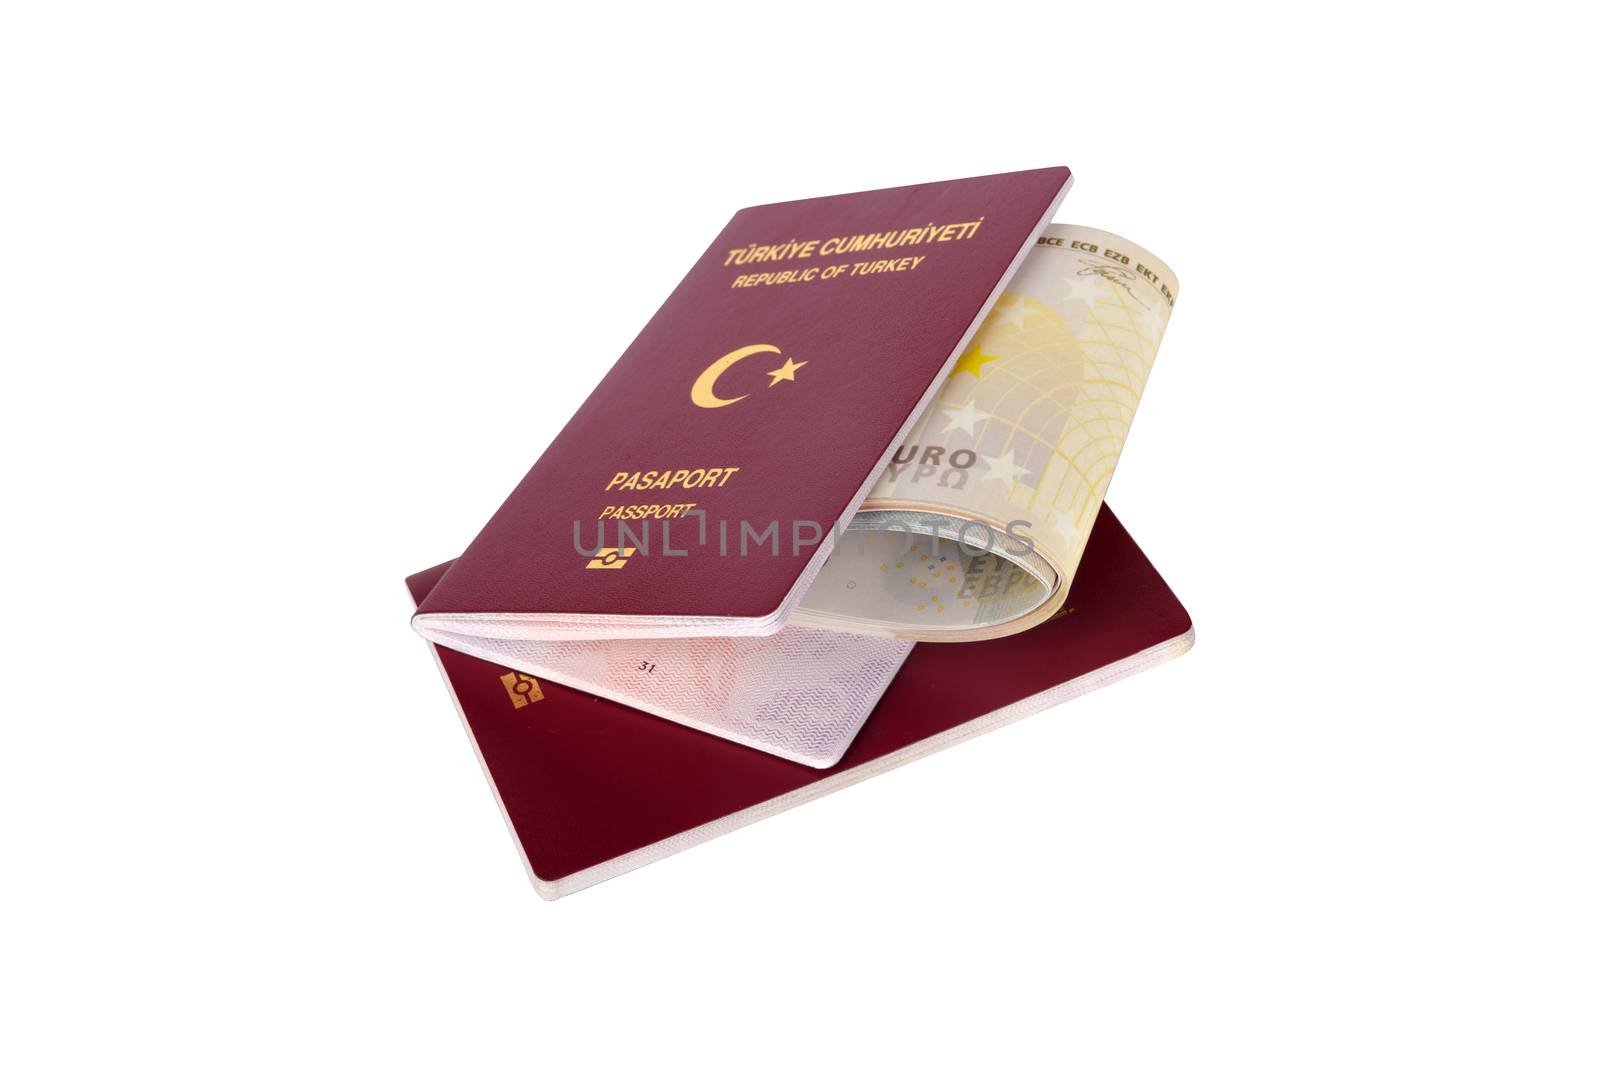 Finance concept, euro money banknotes in passport with the text Republic of Turkey in Turkish, isolated on white background.